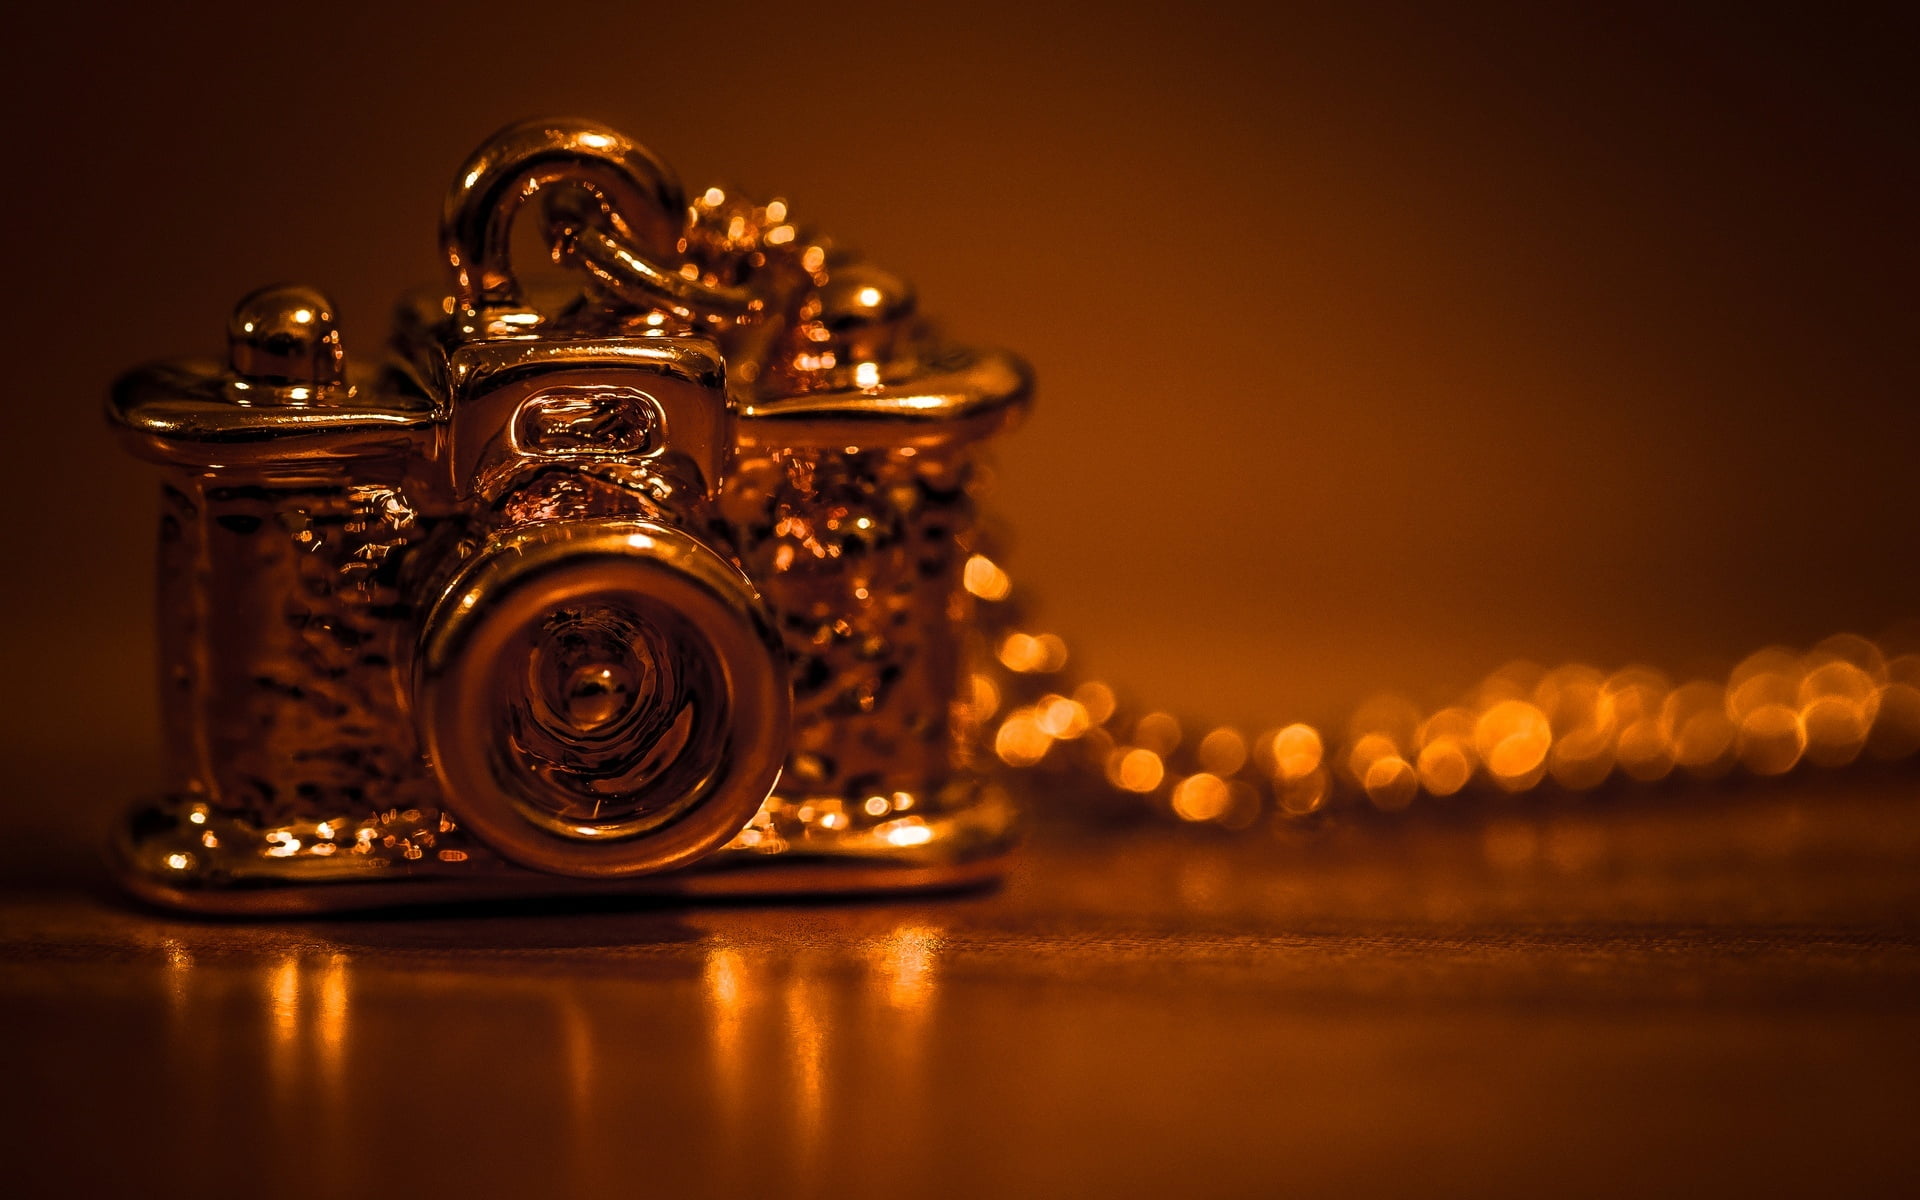 gold-colored DSLR camera pendant necklace in selective focus photography